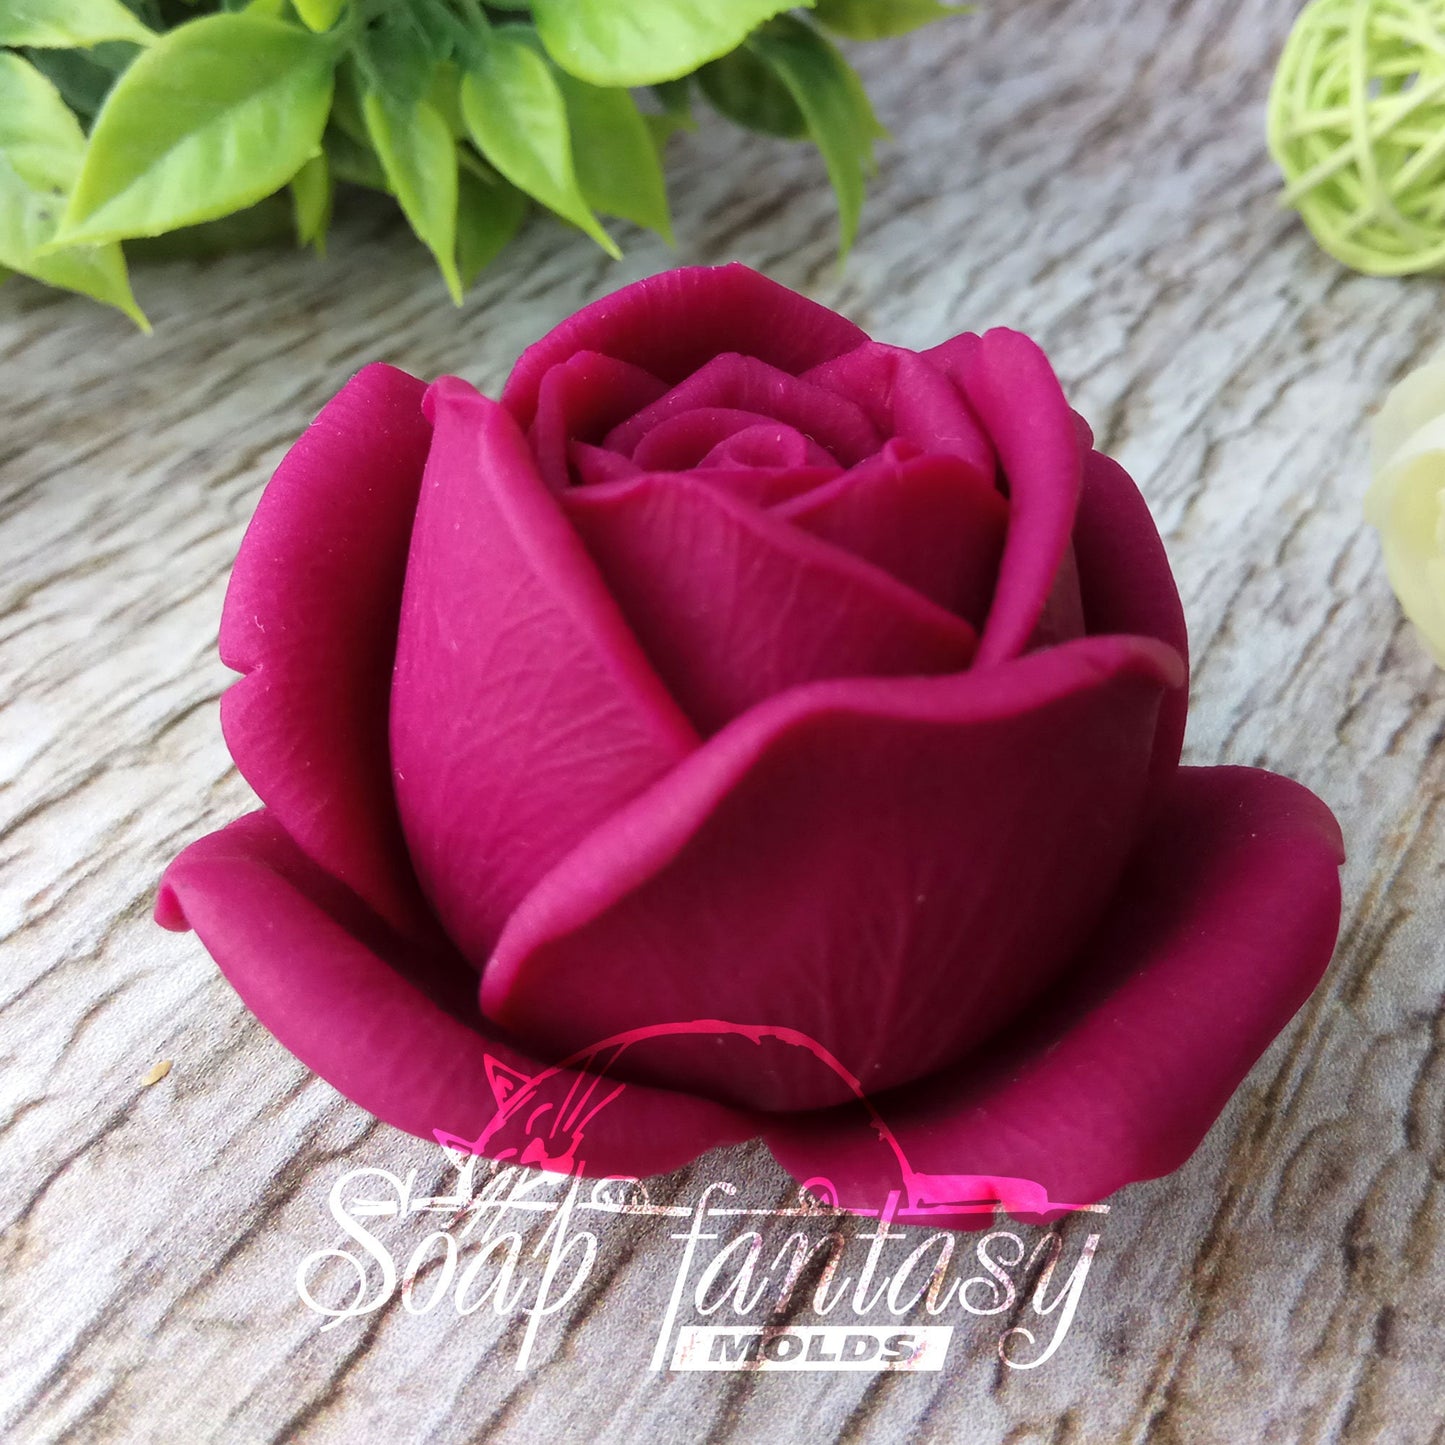 Rose "Dolce vita" silicone mold for soap making